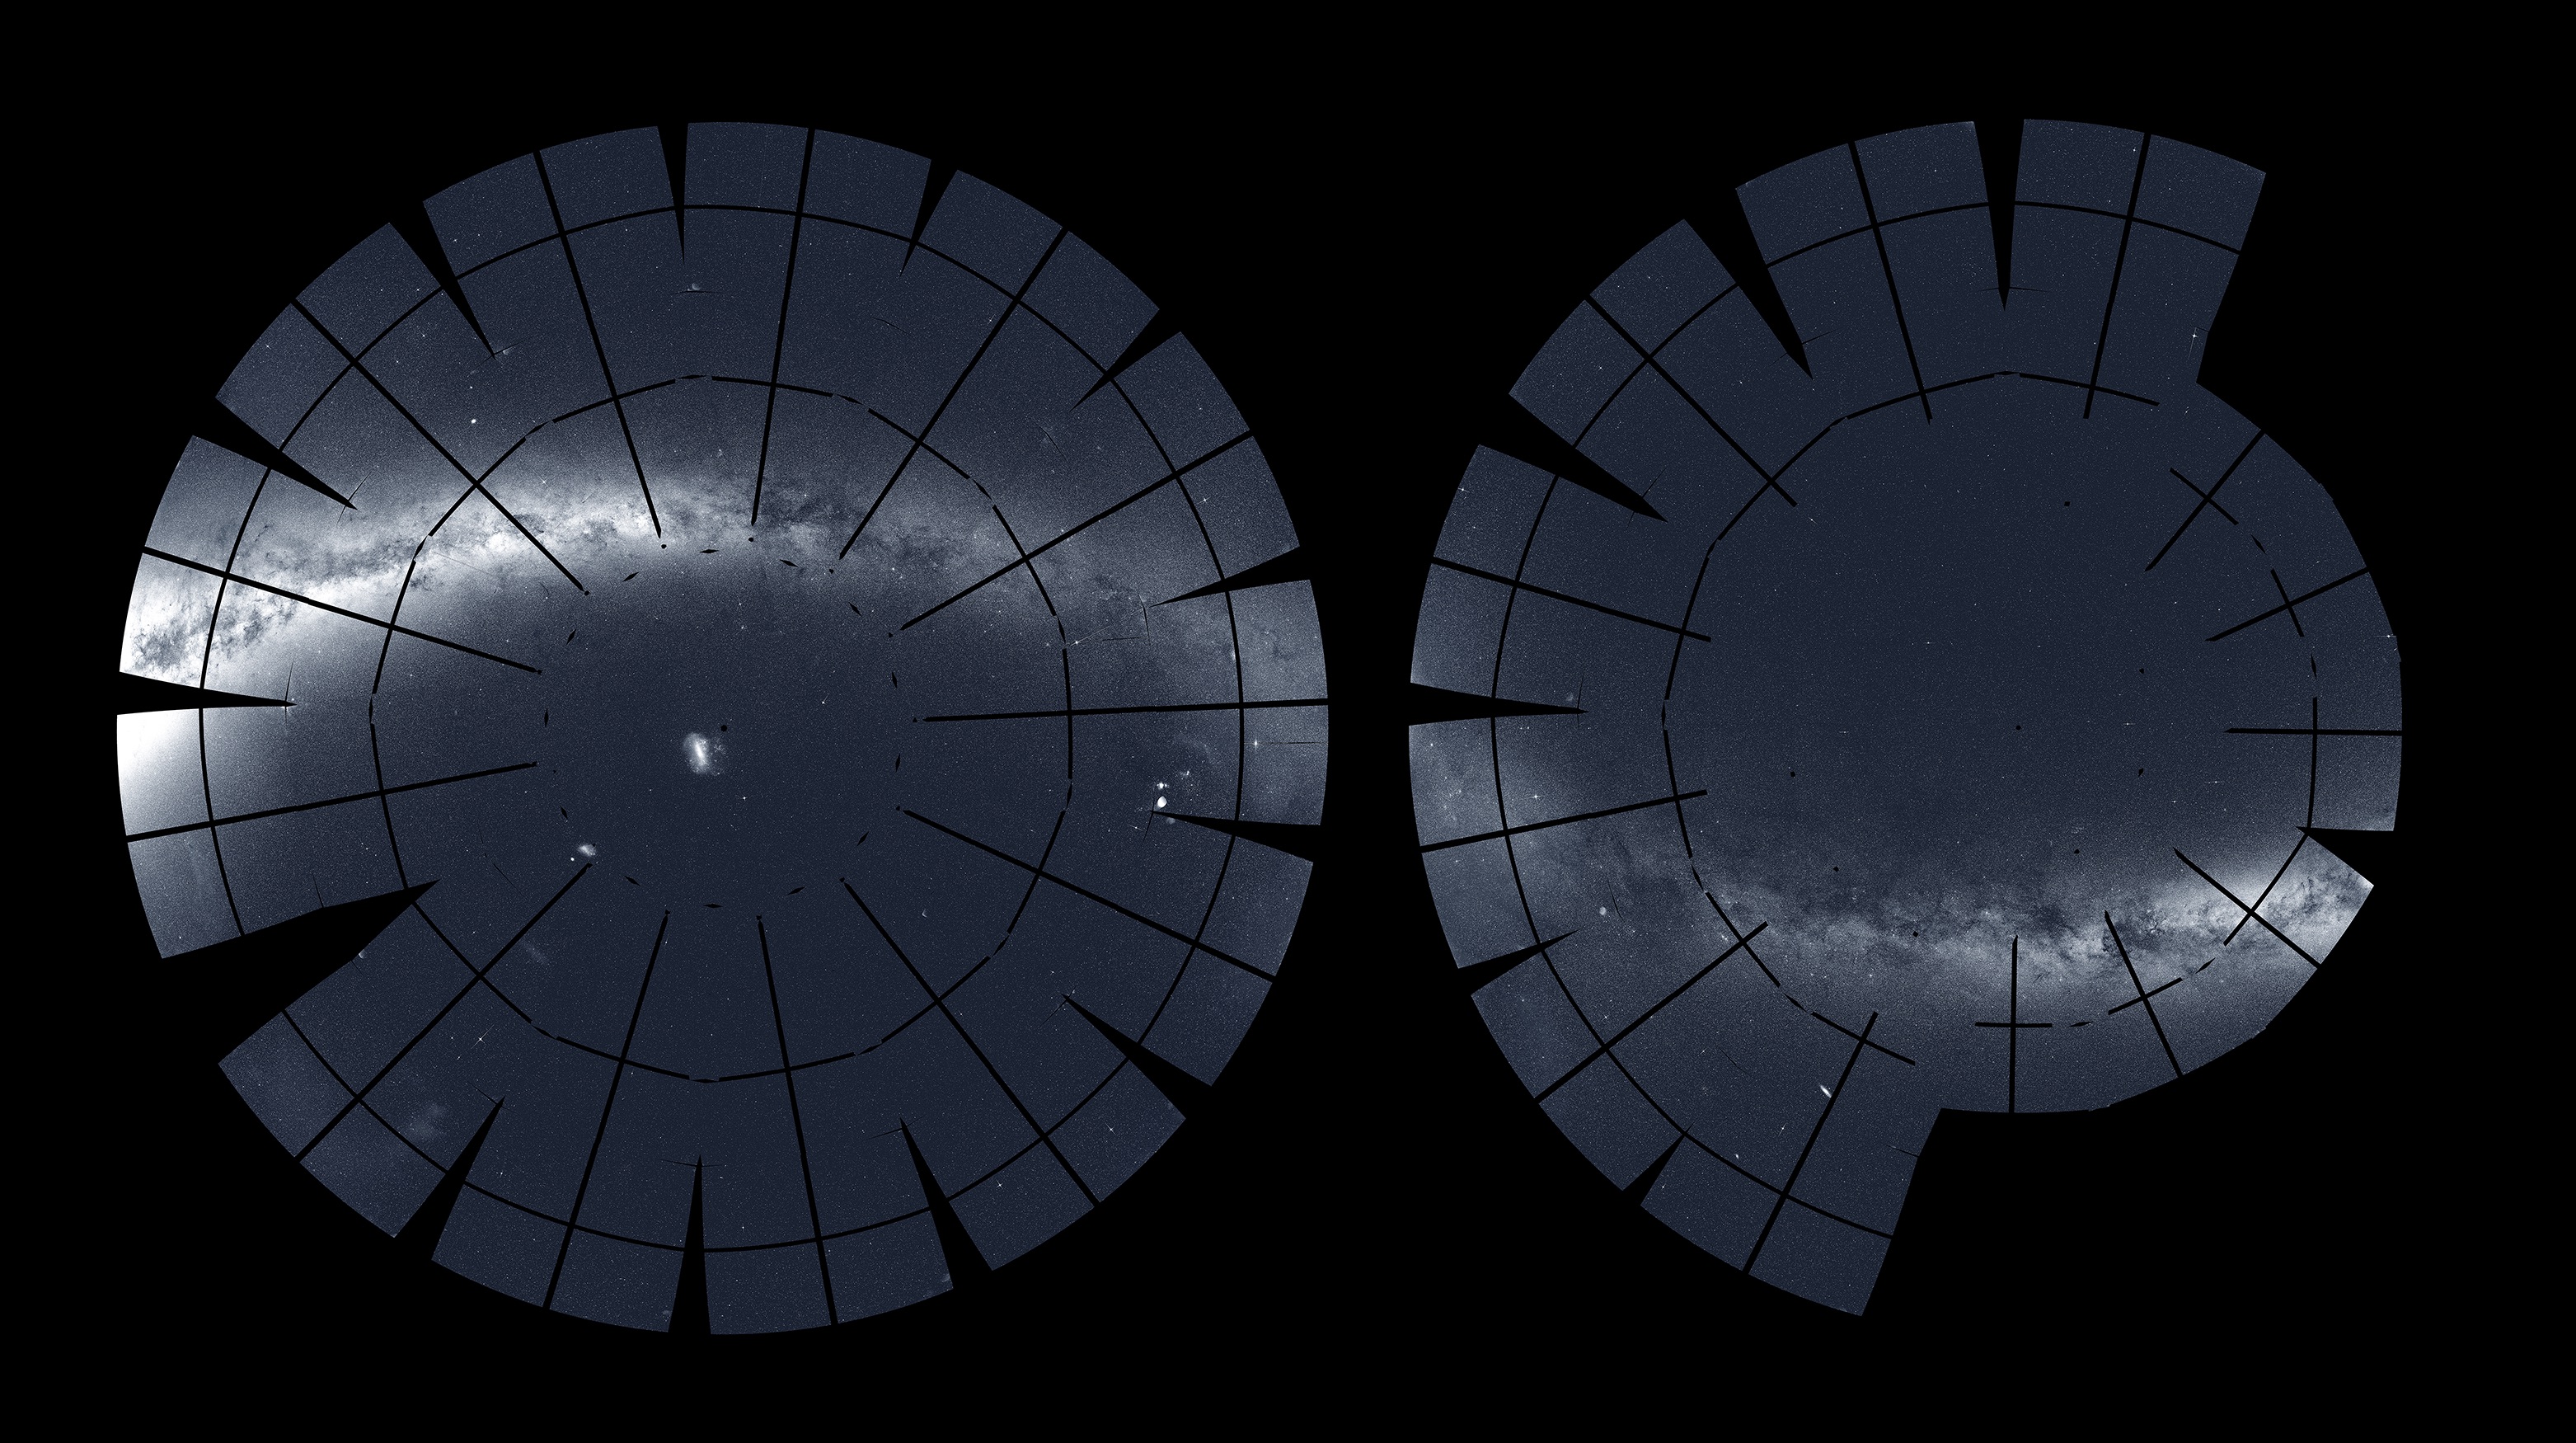 Two circular views of the night sky captured by NASA’s TESS mission are side by side. Each is made up of segments that look like a film strip studded with stars. On the left is the southern hemisphere, which is a complete circle of segments. A band of white light runs through the upper half of the circle in a gentle arc. This bright band is the plane of the Milky Way. On the right is the northern hemisphere. The bright white band continues through this hemisphere as a gentle downward arc in the bottom part of the circle.